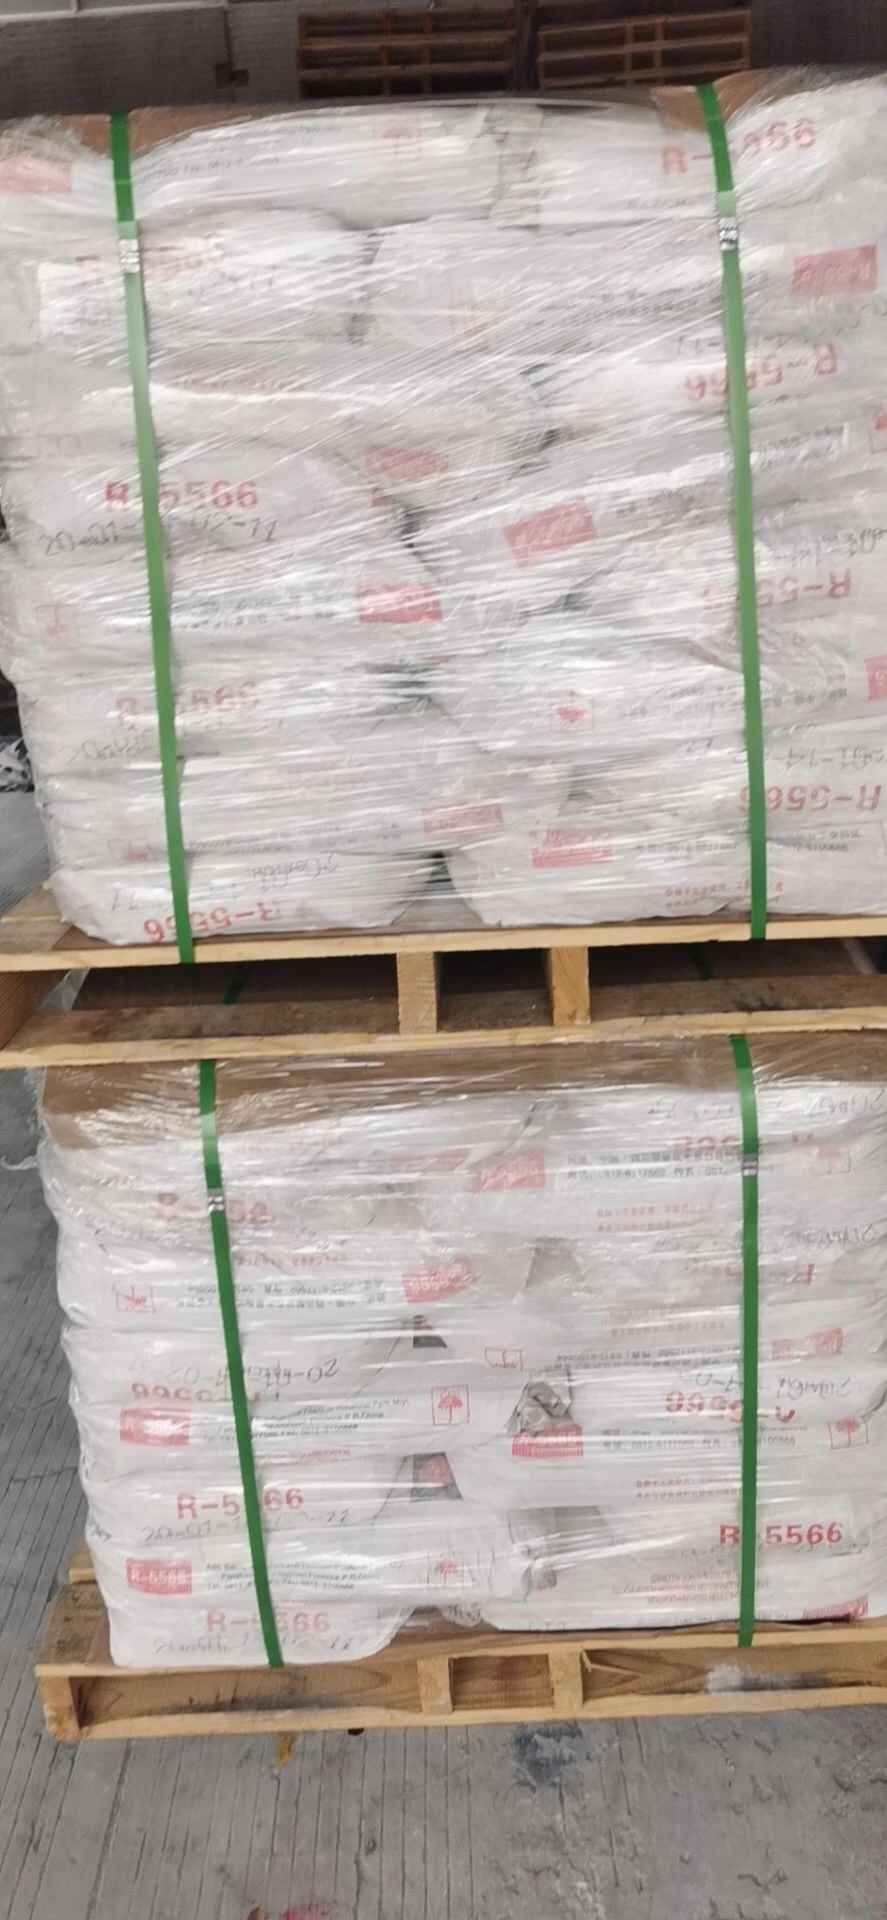 Titanium dioxide Dongfang R5566 from China